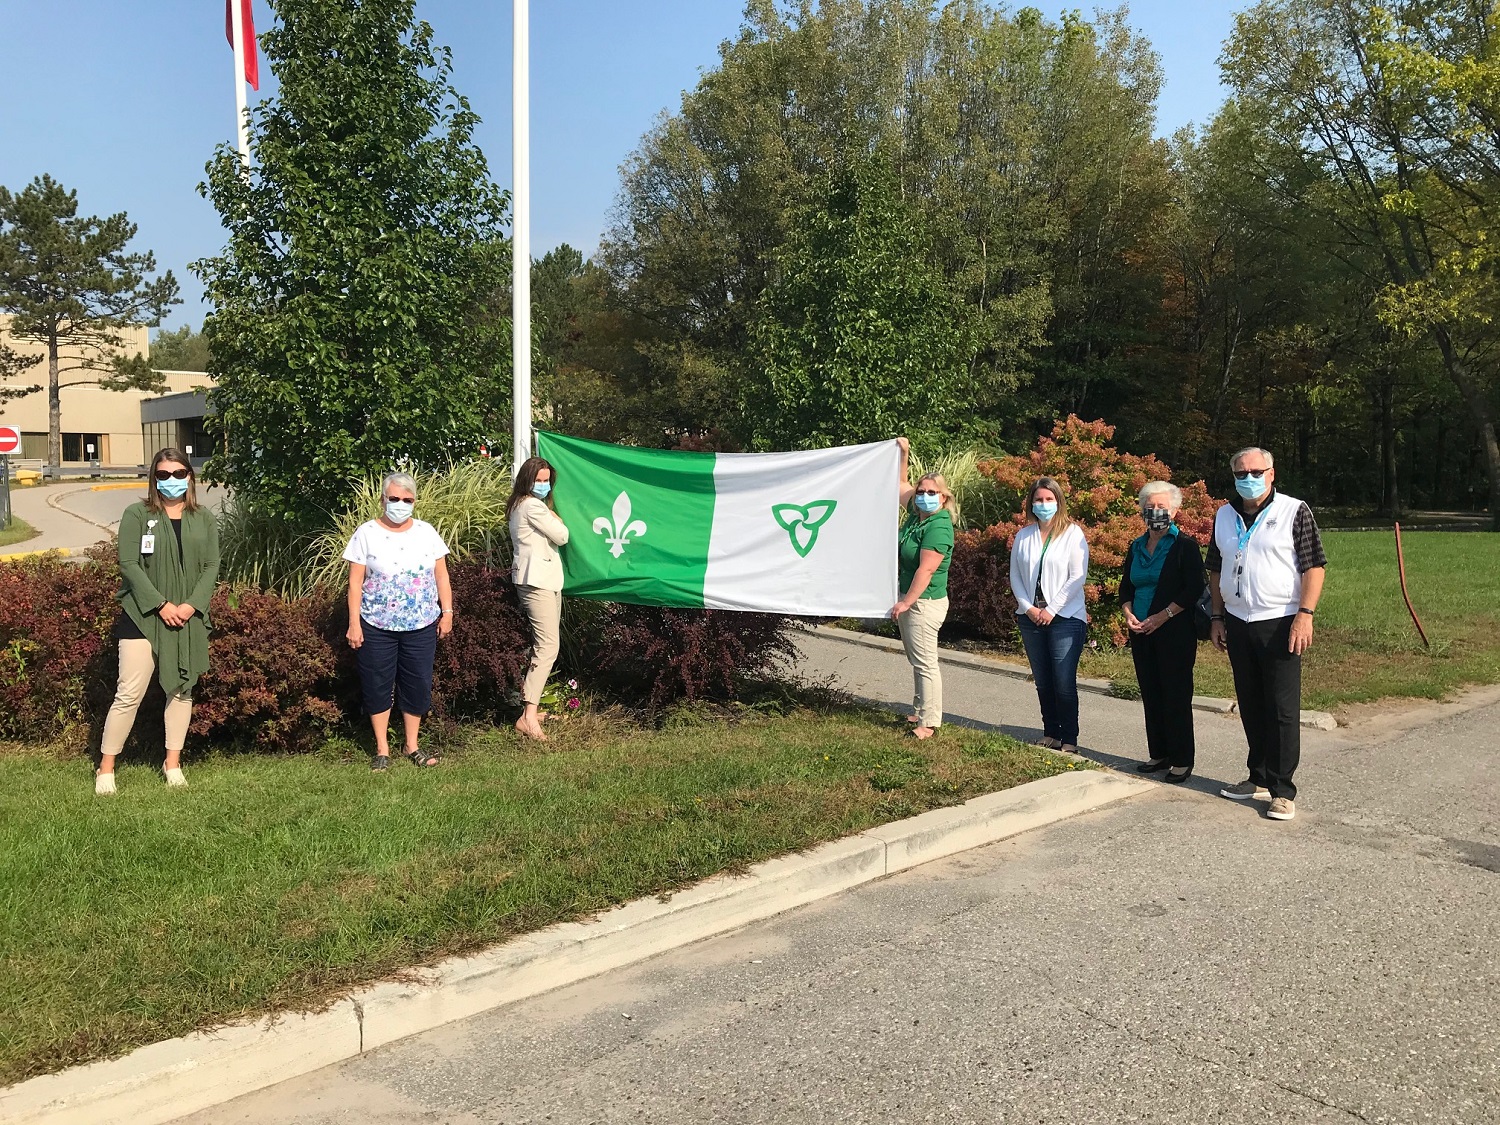 Six women and one man stand distanced wearing masks. Two of the people hold up the green and white Franco-Ontario flag.